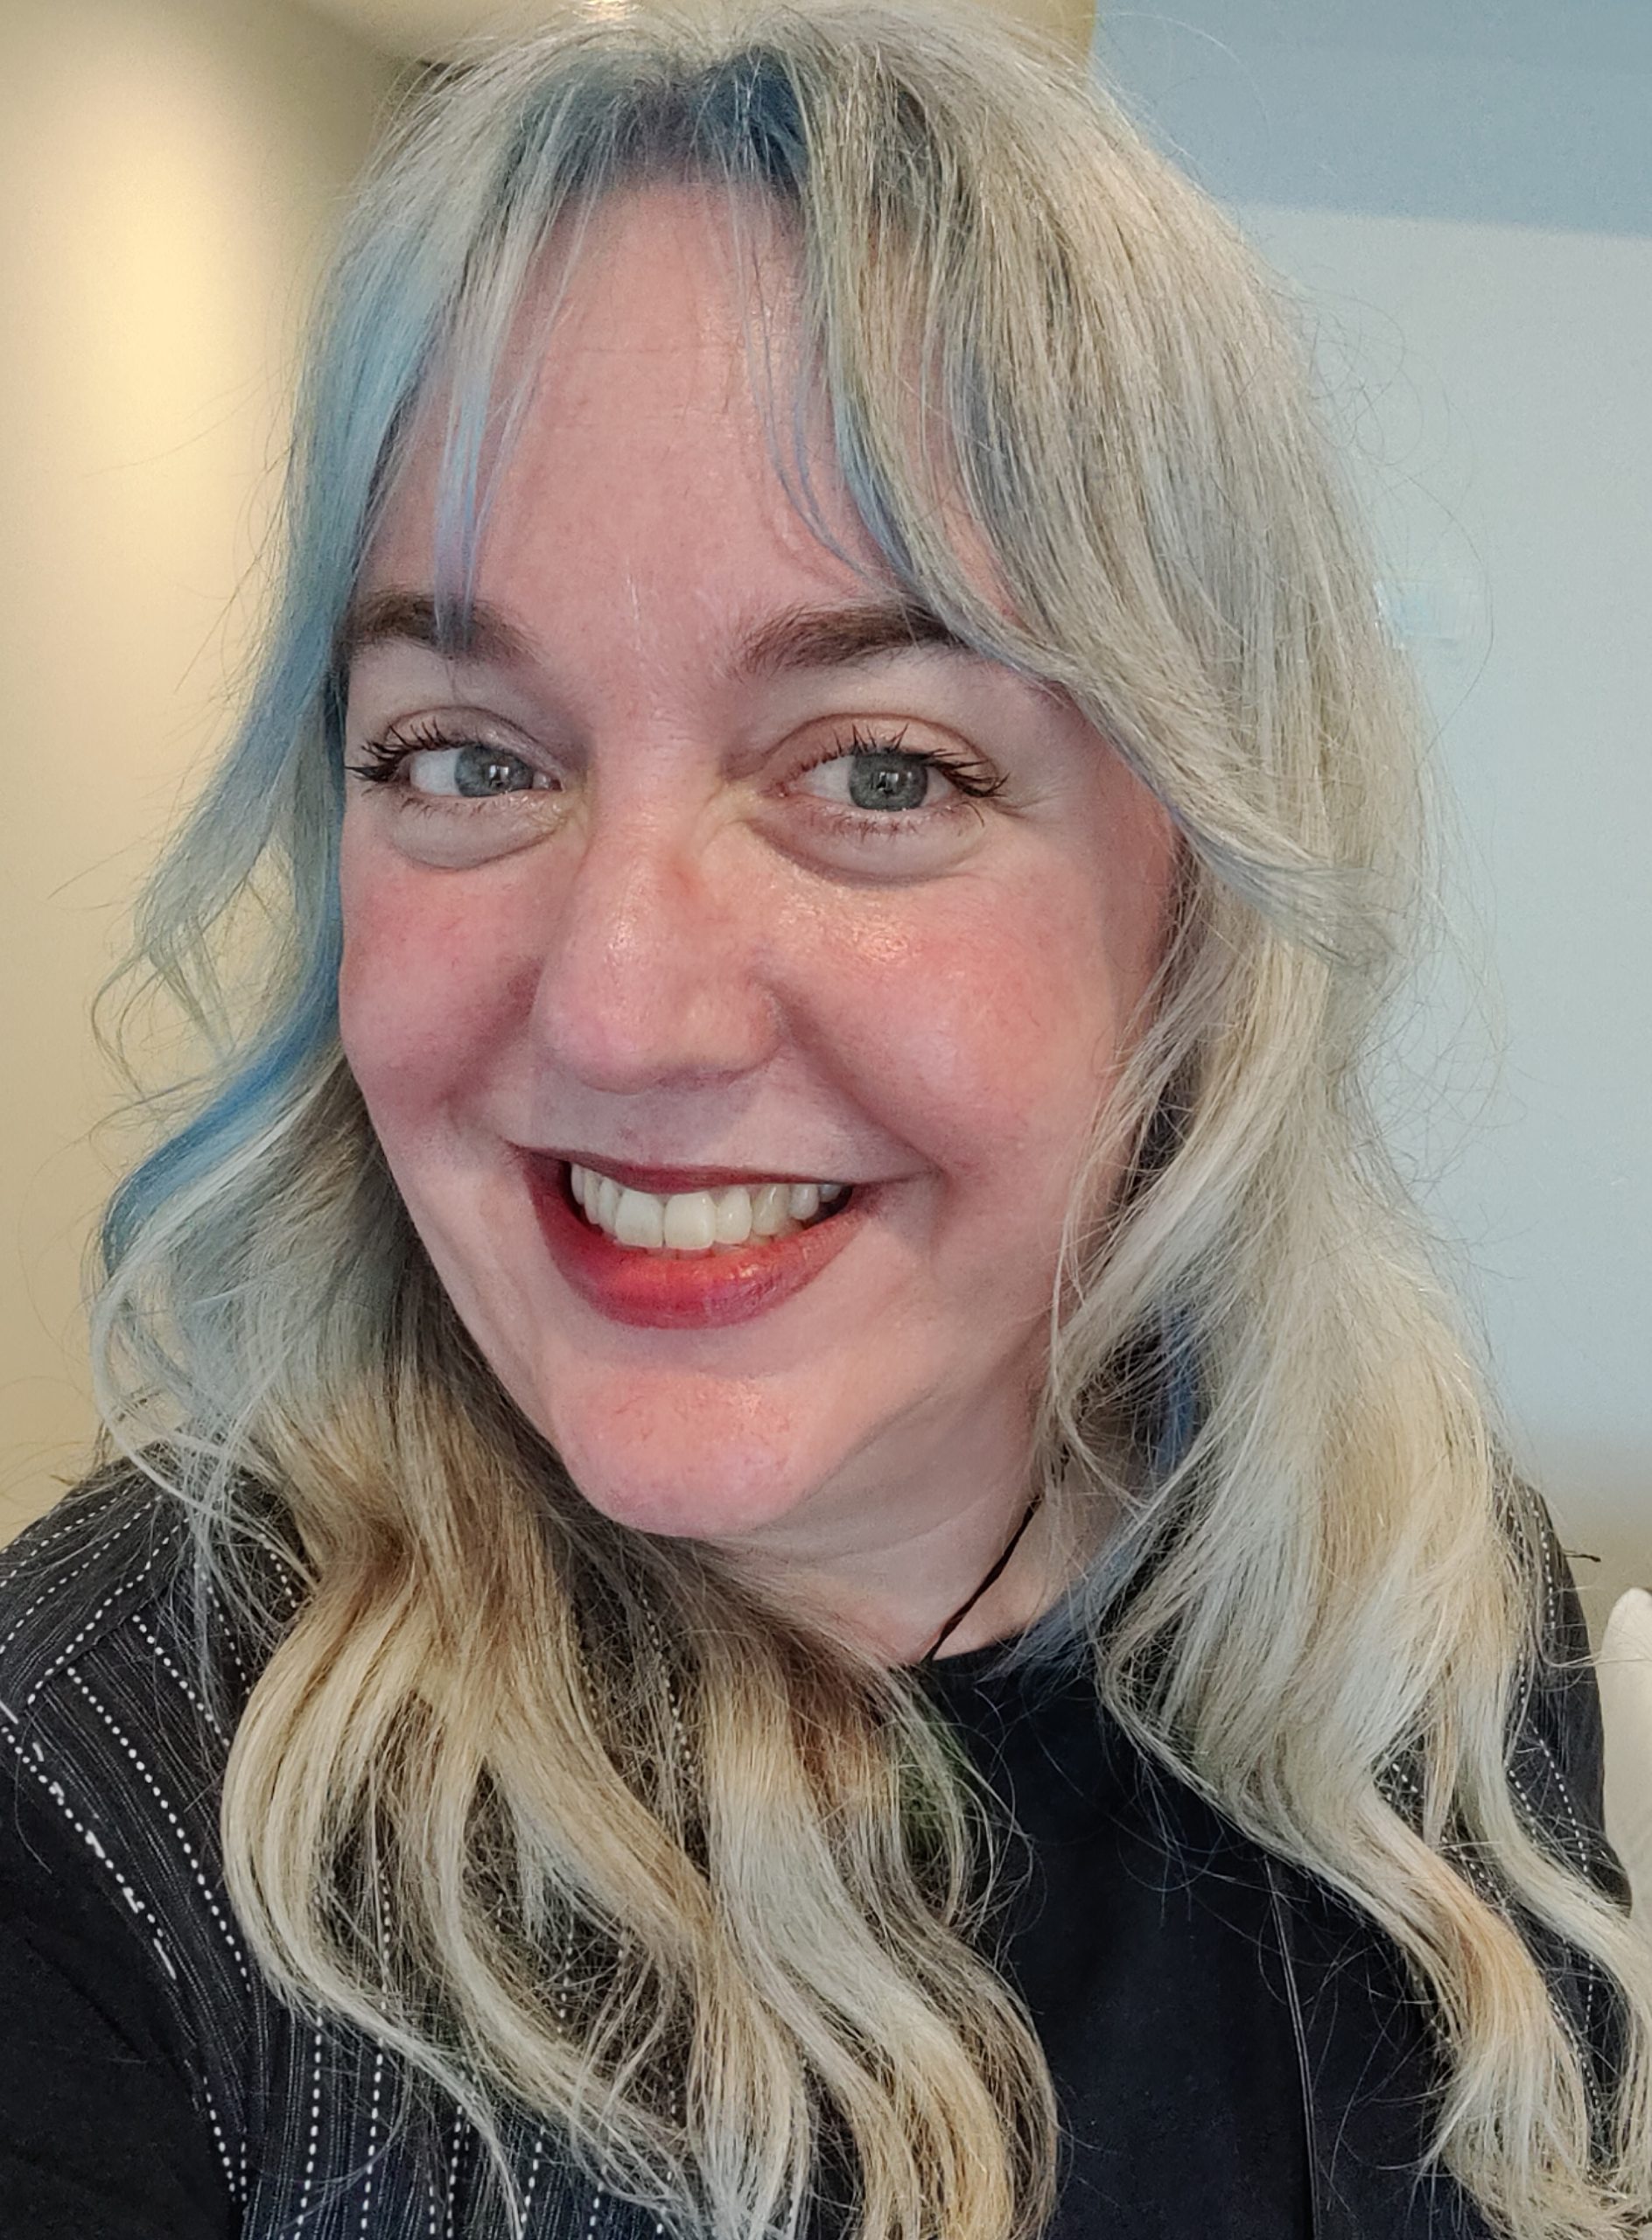 Rachael Herron, a white woman with blue eyes, silver hair with blue streaks, wearing a black shirt, smiling